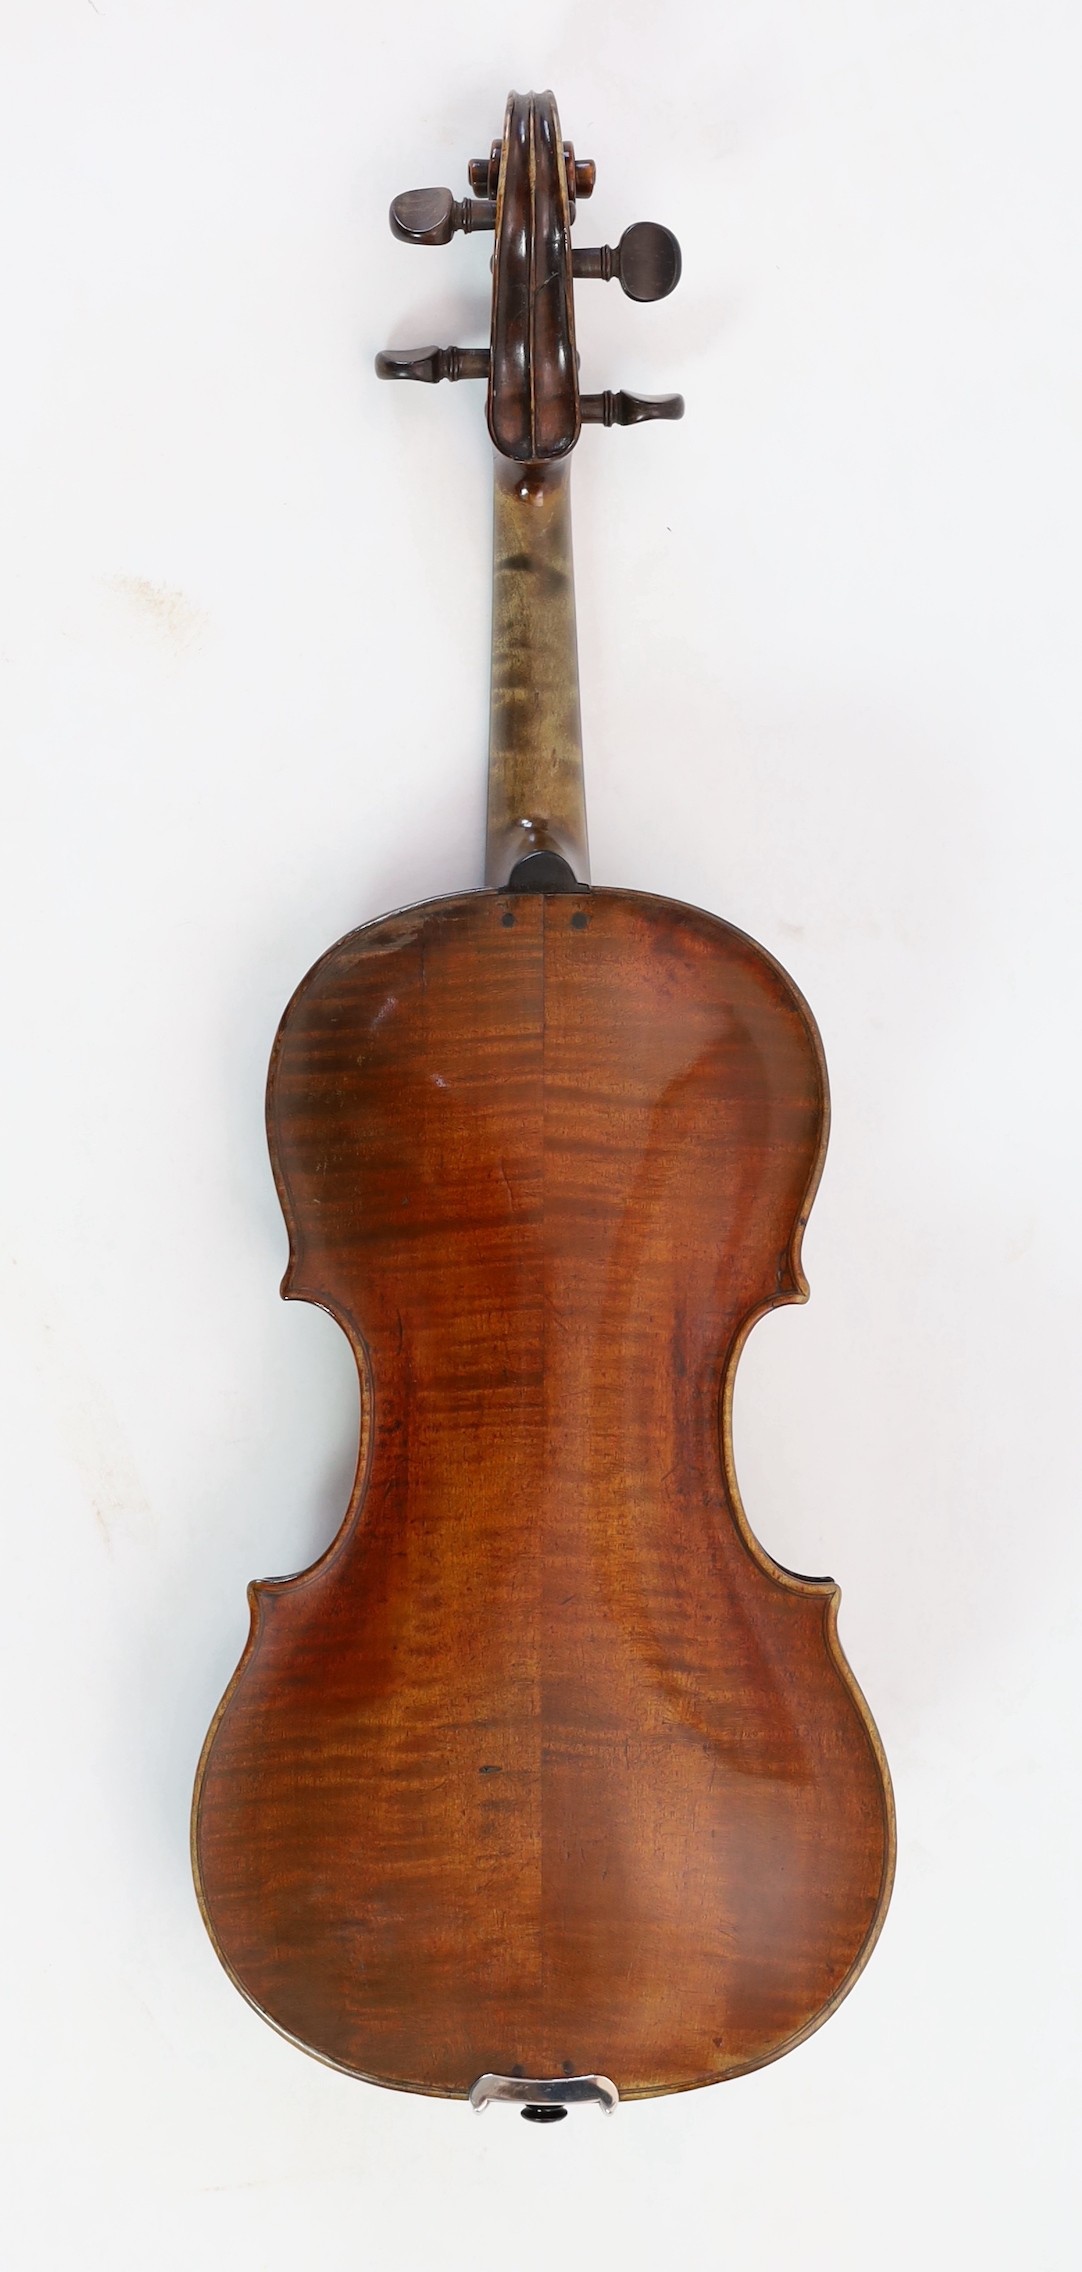 A 19th century violin attributed to Klotz school, unlabelled, the back and sides with medium curl, - Image 9 of 10